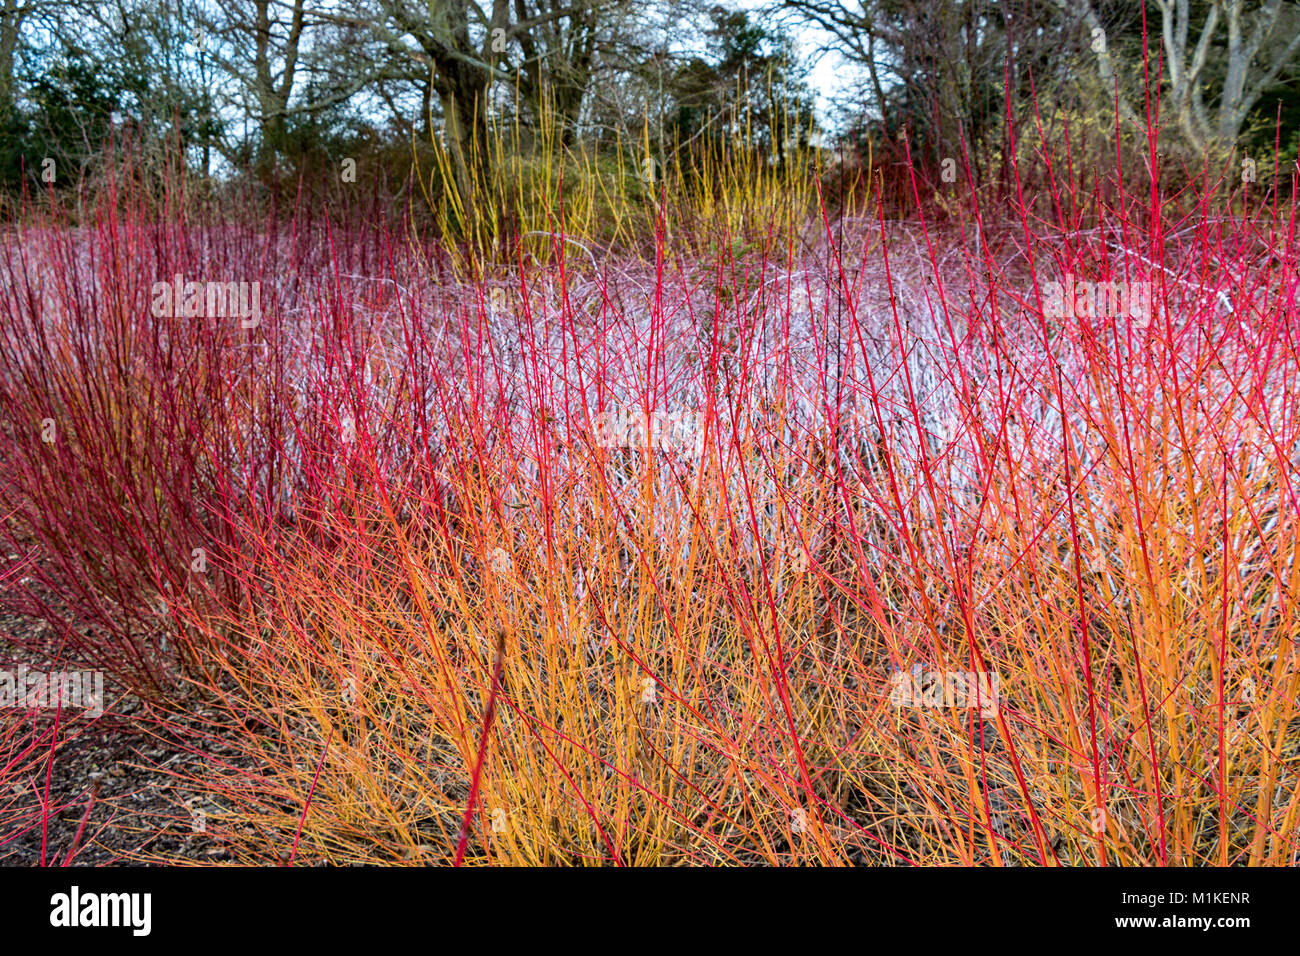 Fiery red Winter Colour at Wisley is provided by a combination of Cornus sanguinea Midwinter fire in the foreground and Rubus cockburnianus at the rea Stock Photo